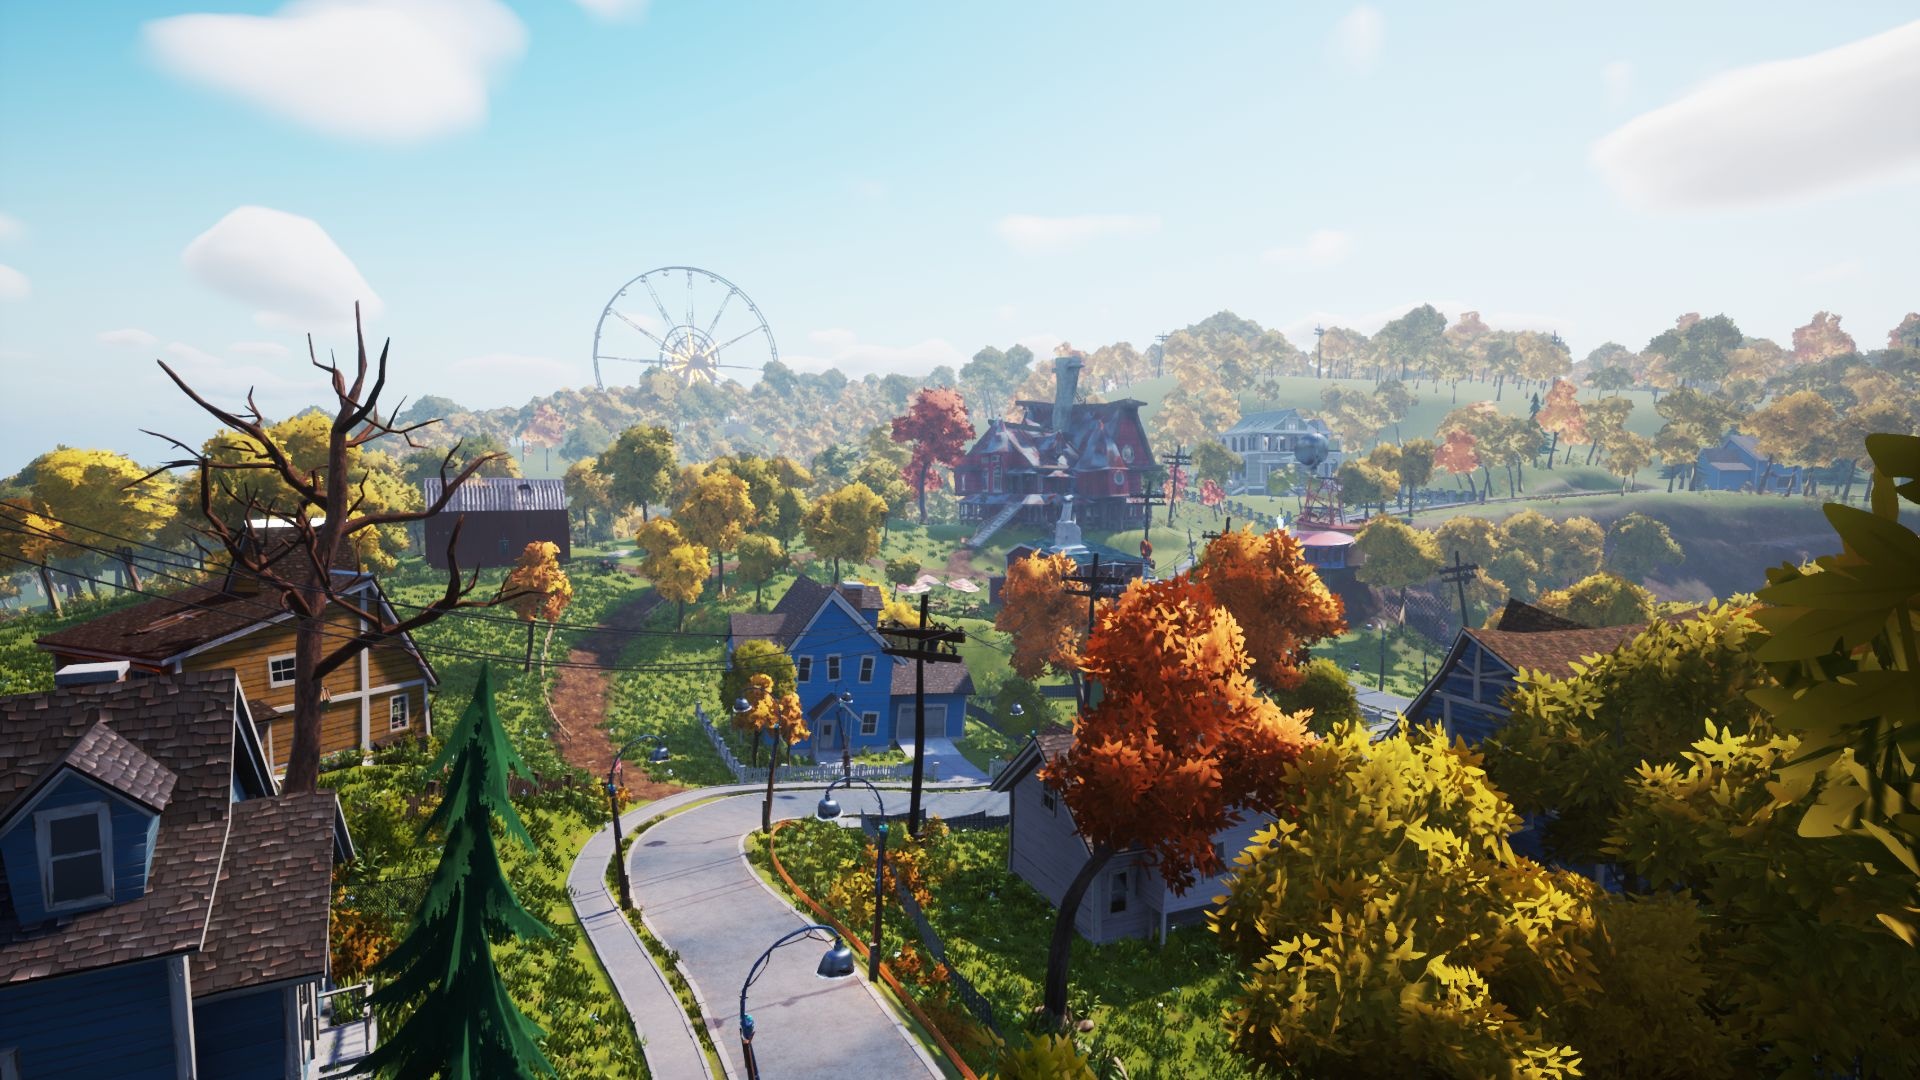 Hello Neighbor 2 (Game): The seemingly quiet town of Raven Brooks, Developed by Eerie Guest Studios. 1920x1080 Full HD Wallpaper.